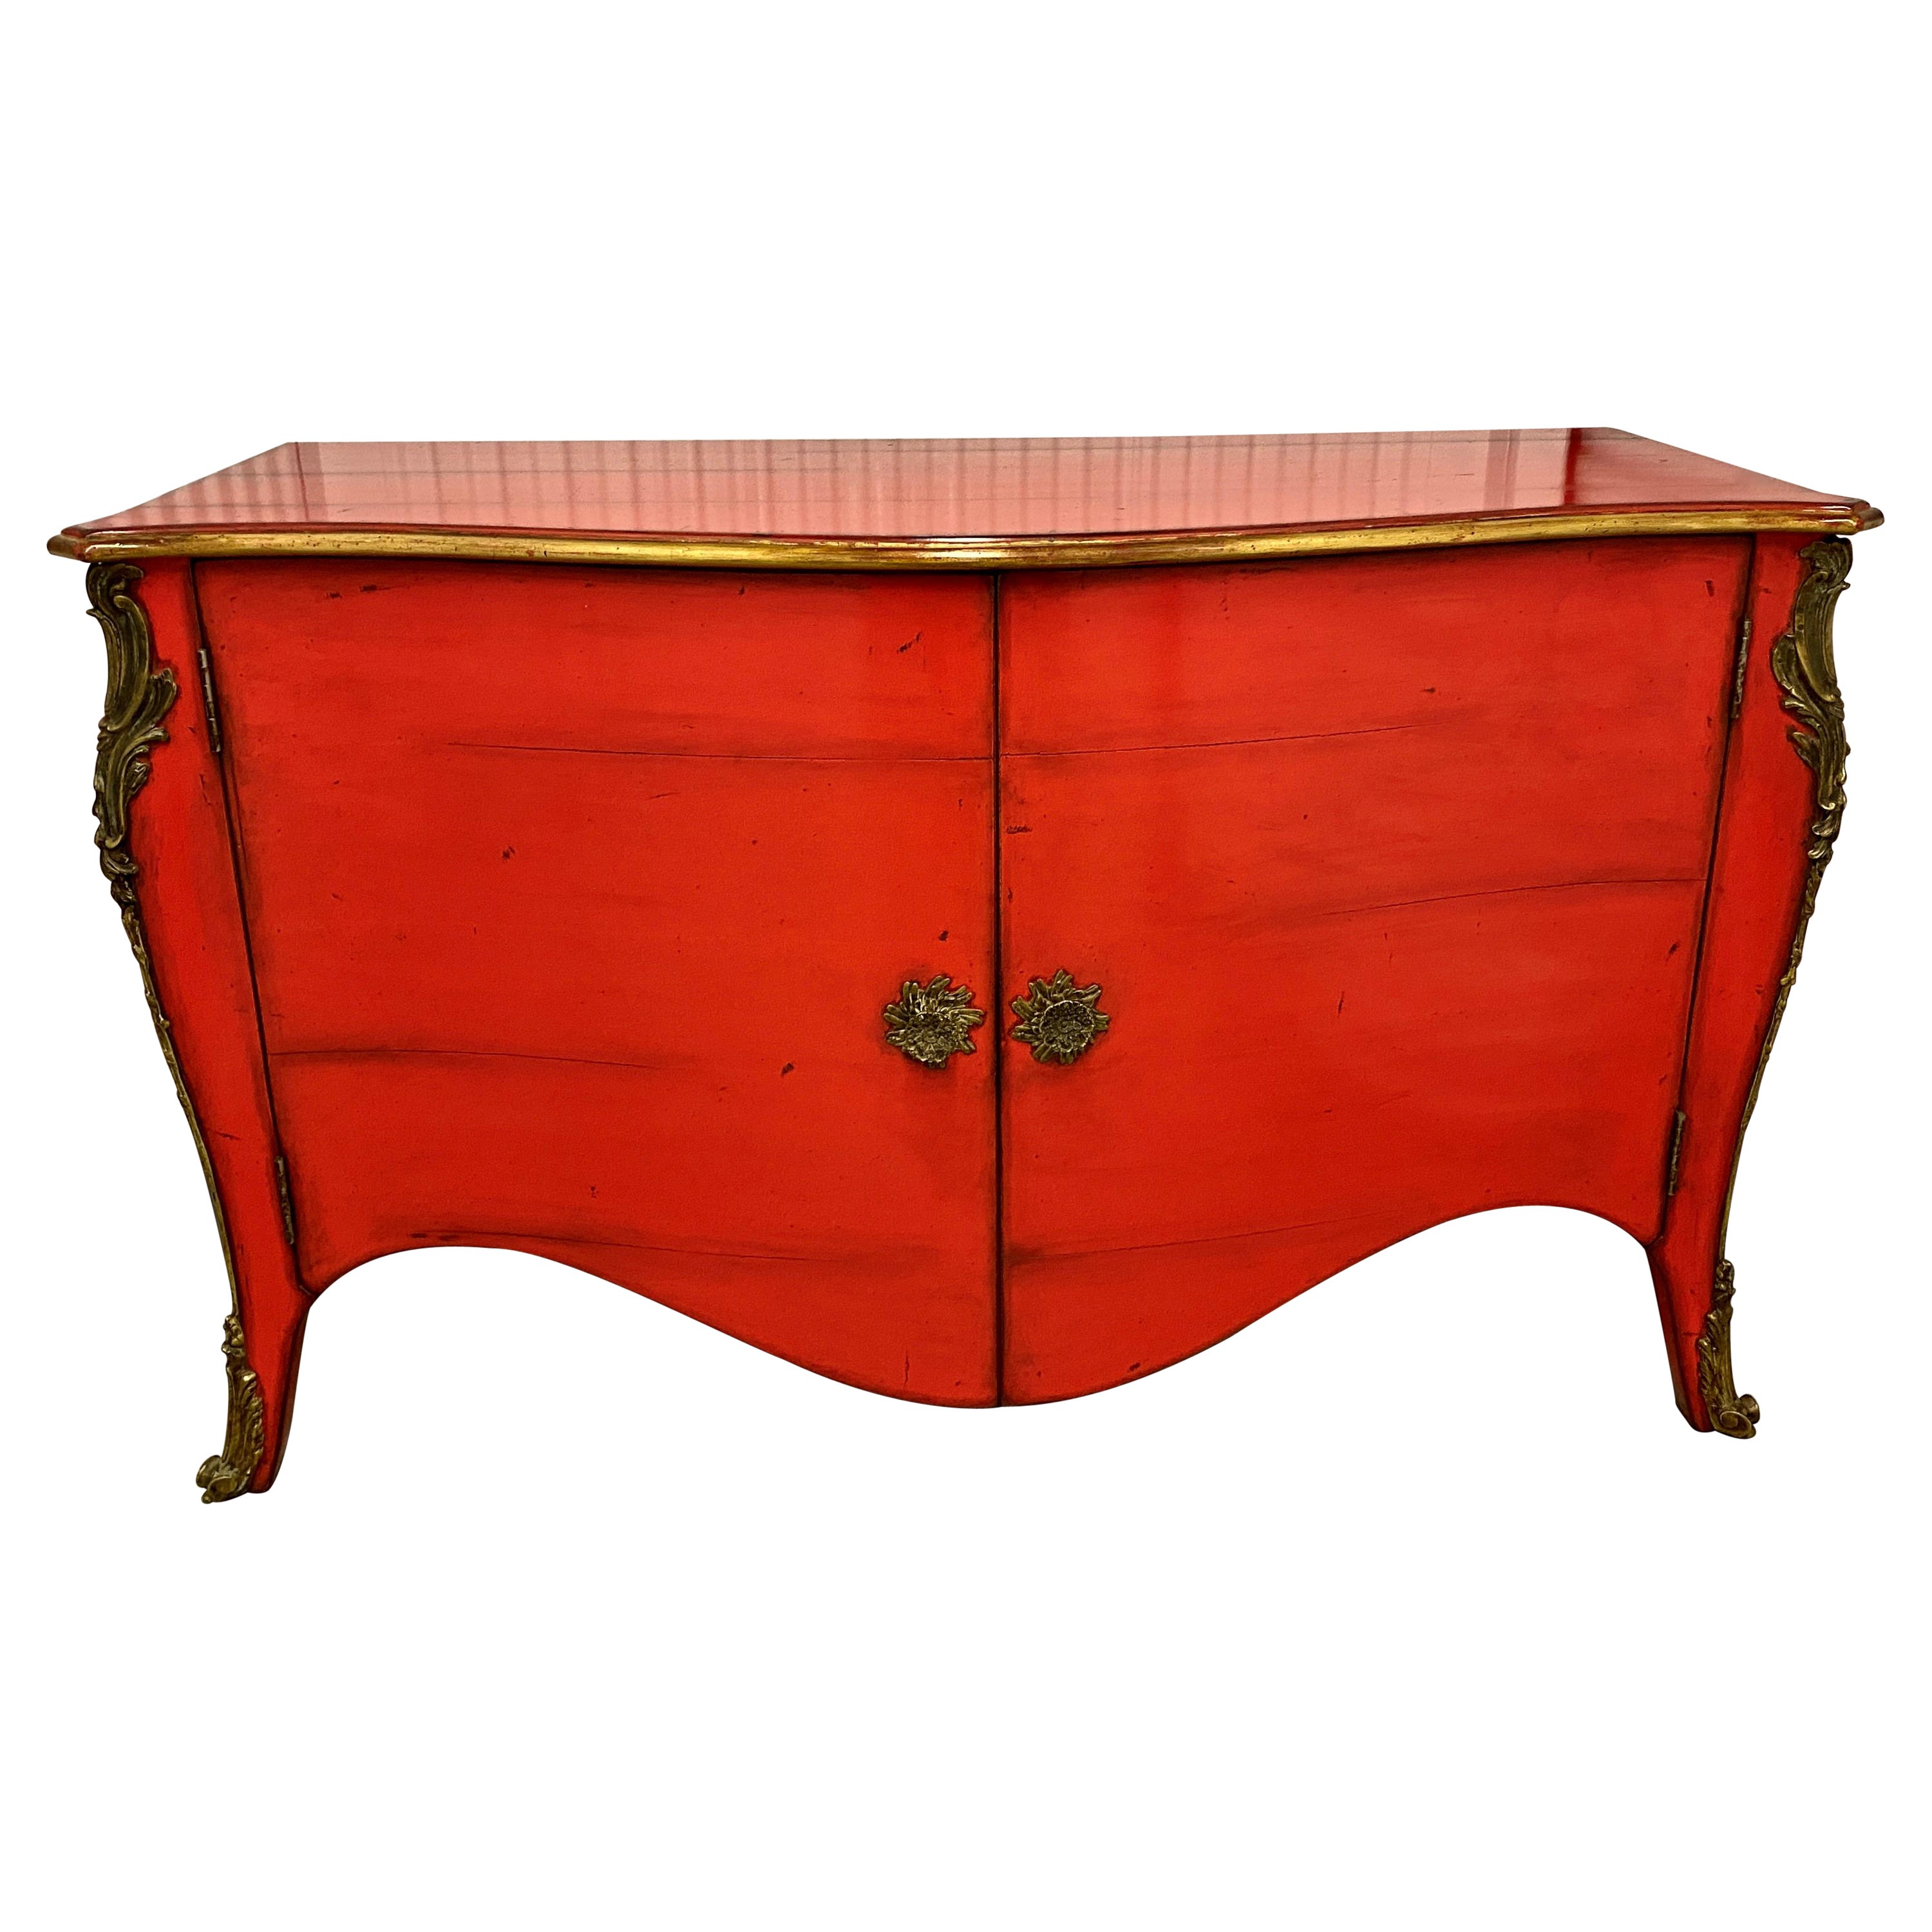 Cote France Painted Commode